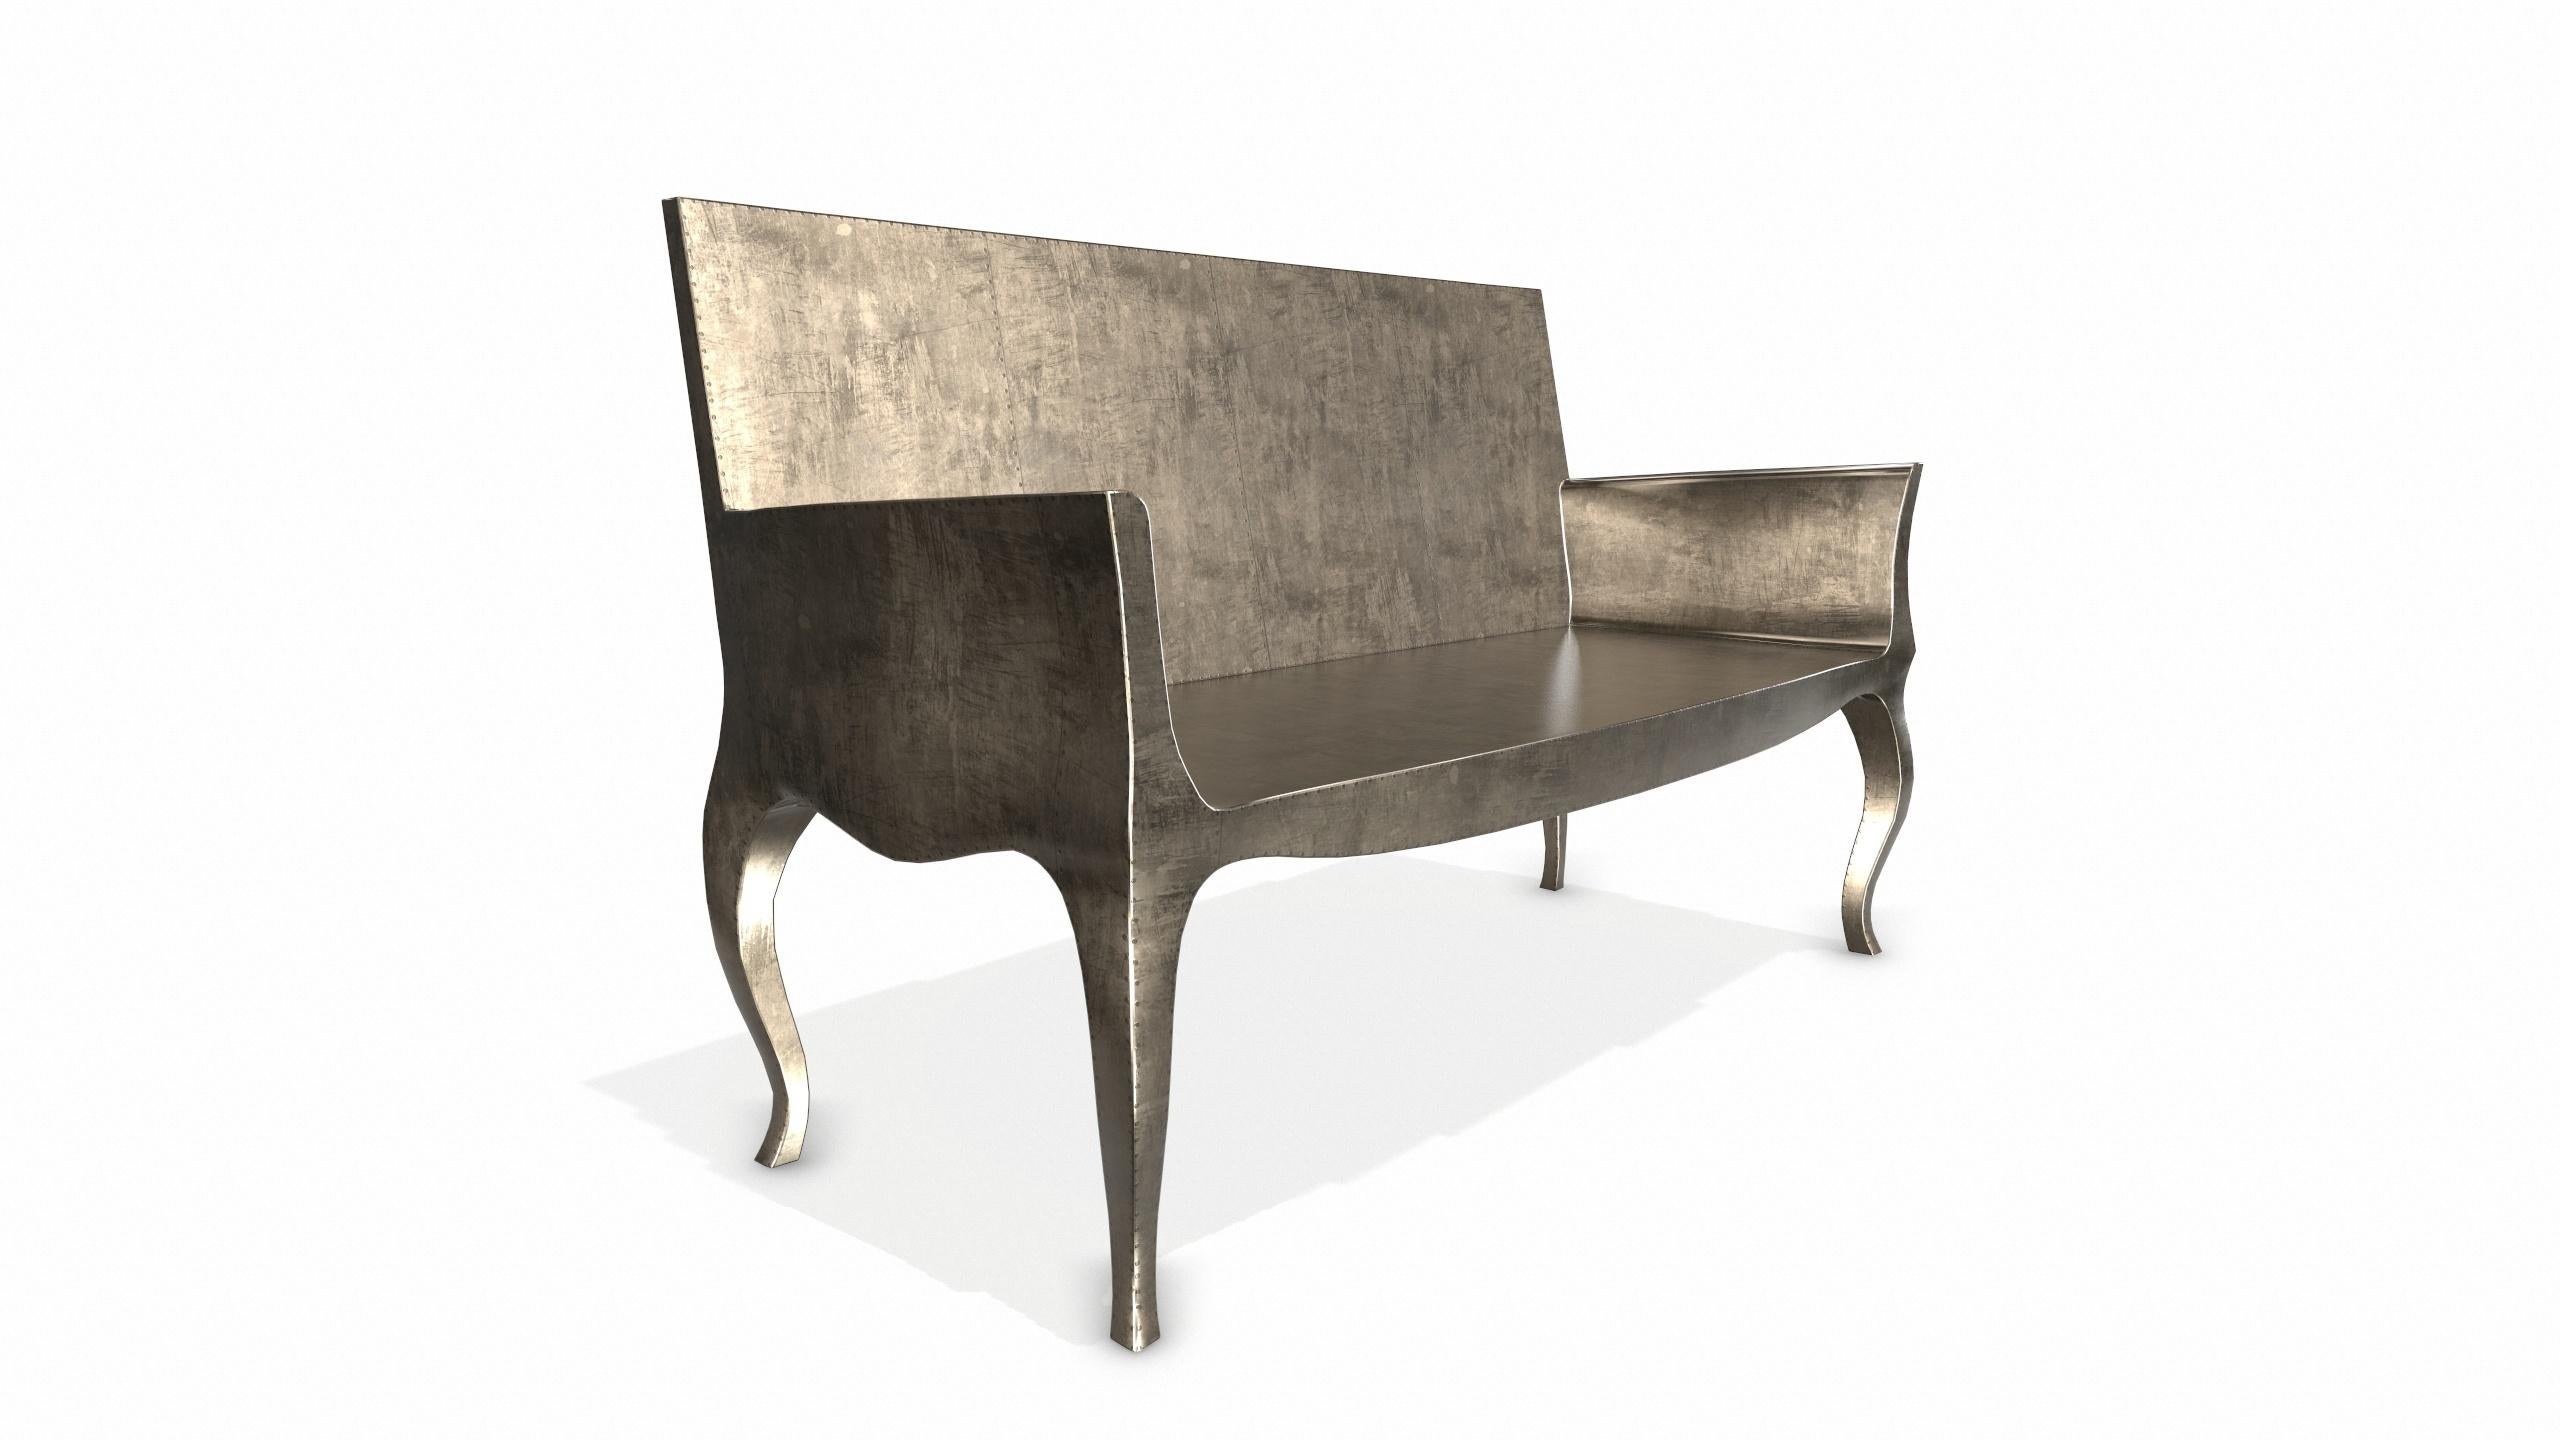 Louise Settee Art Deco Loveseats in Smooth Antique Bronze by Paul Mathieu In New Condition For Sale In New York, NY